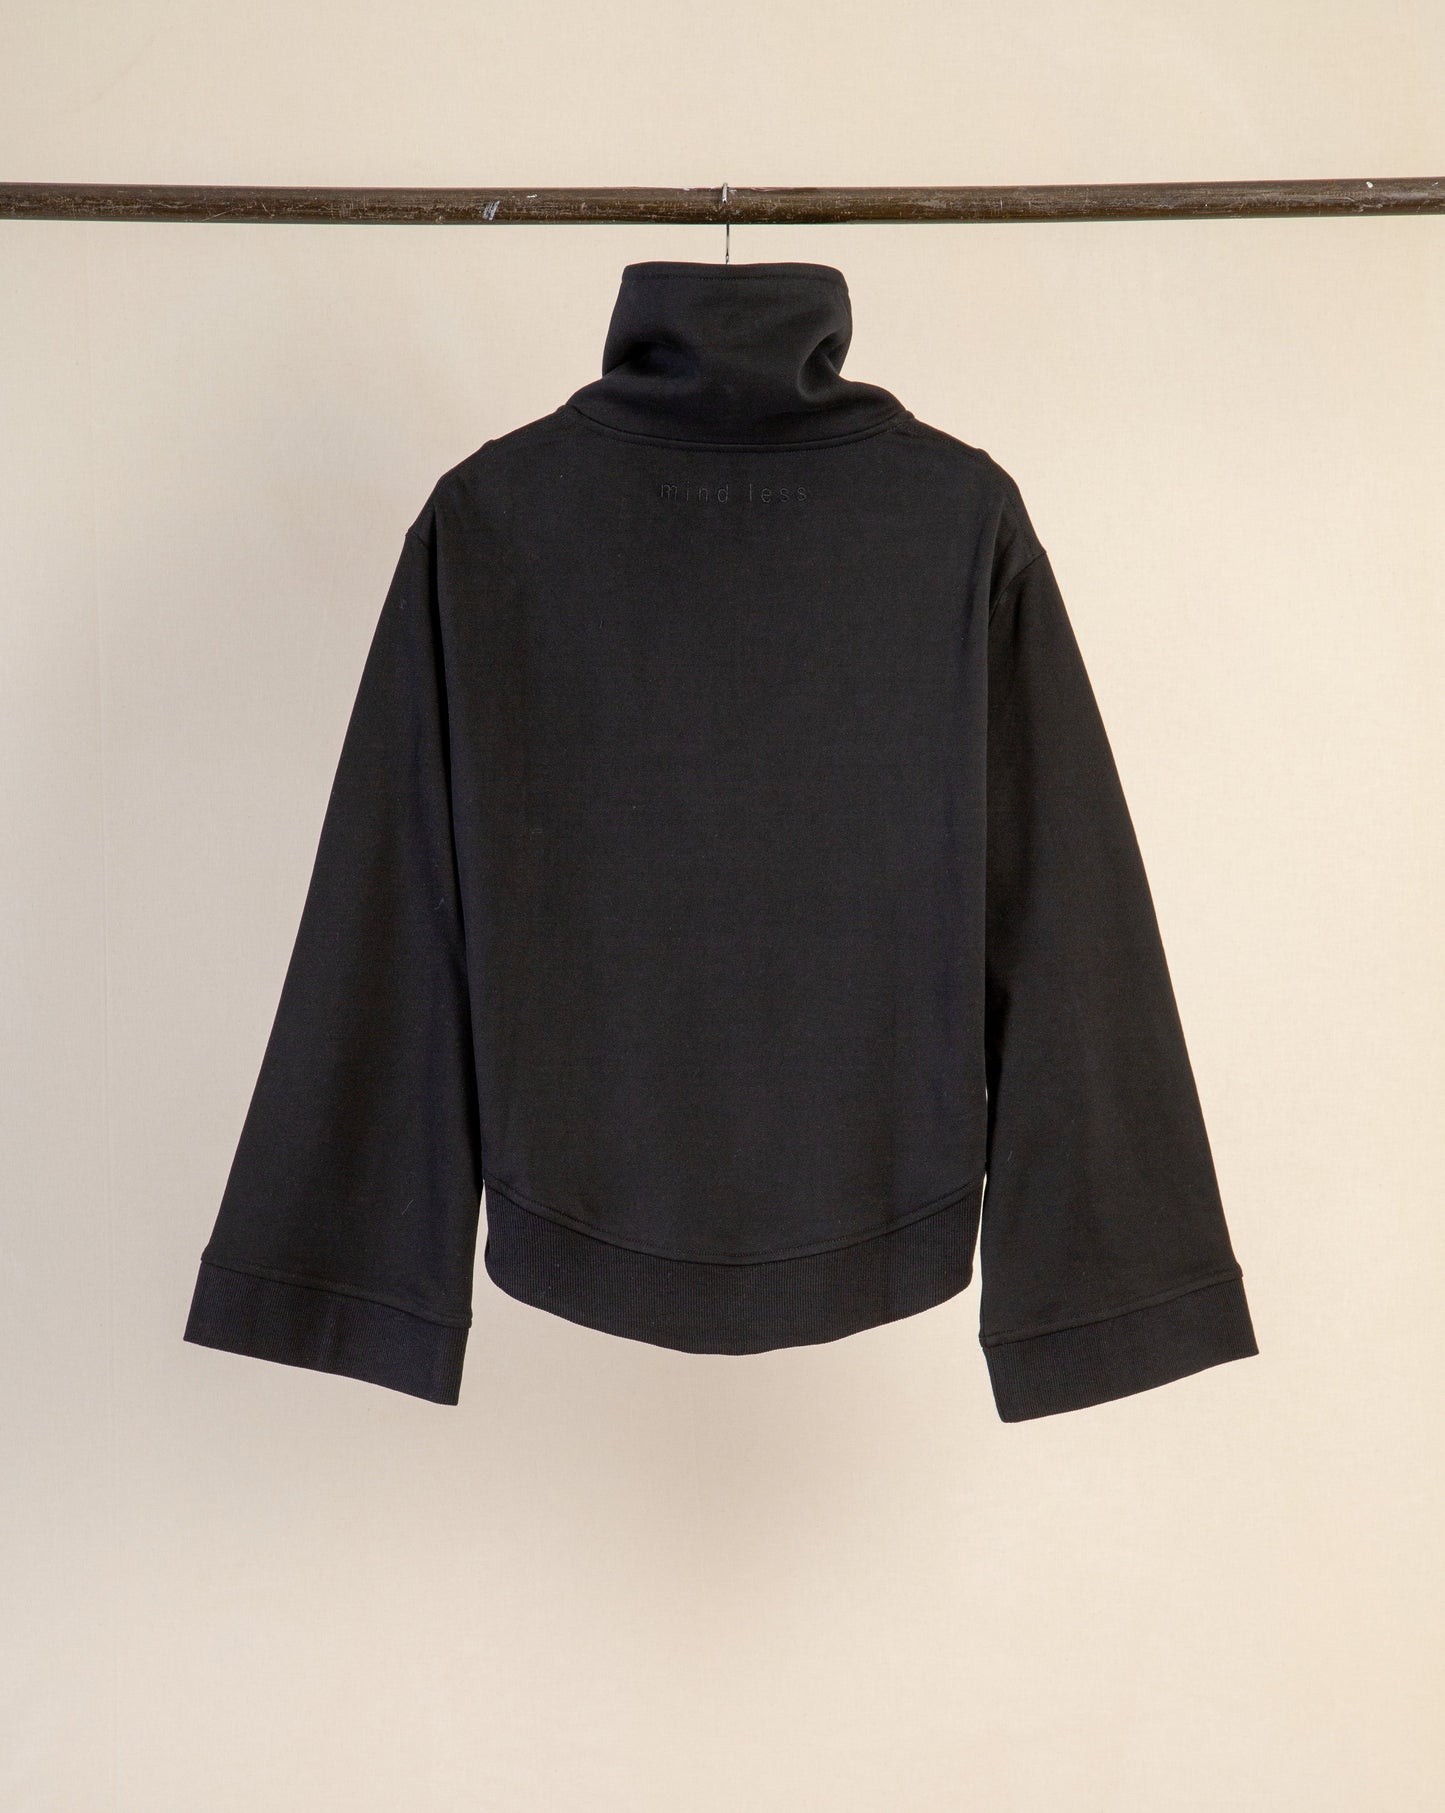 Back View of Black Medio Pullover by Mind Less